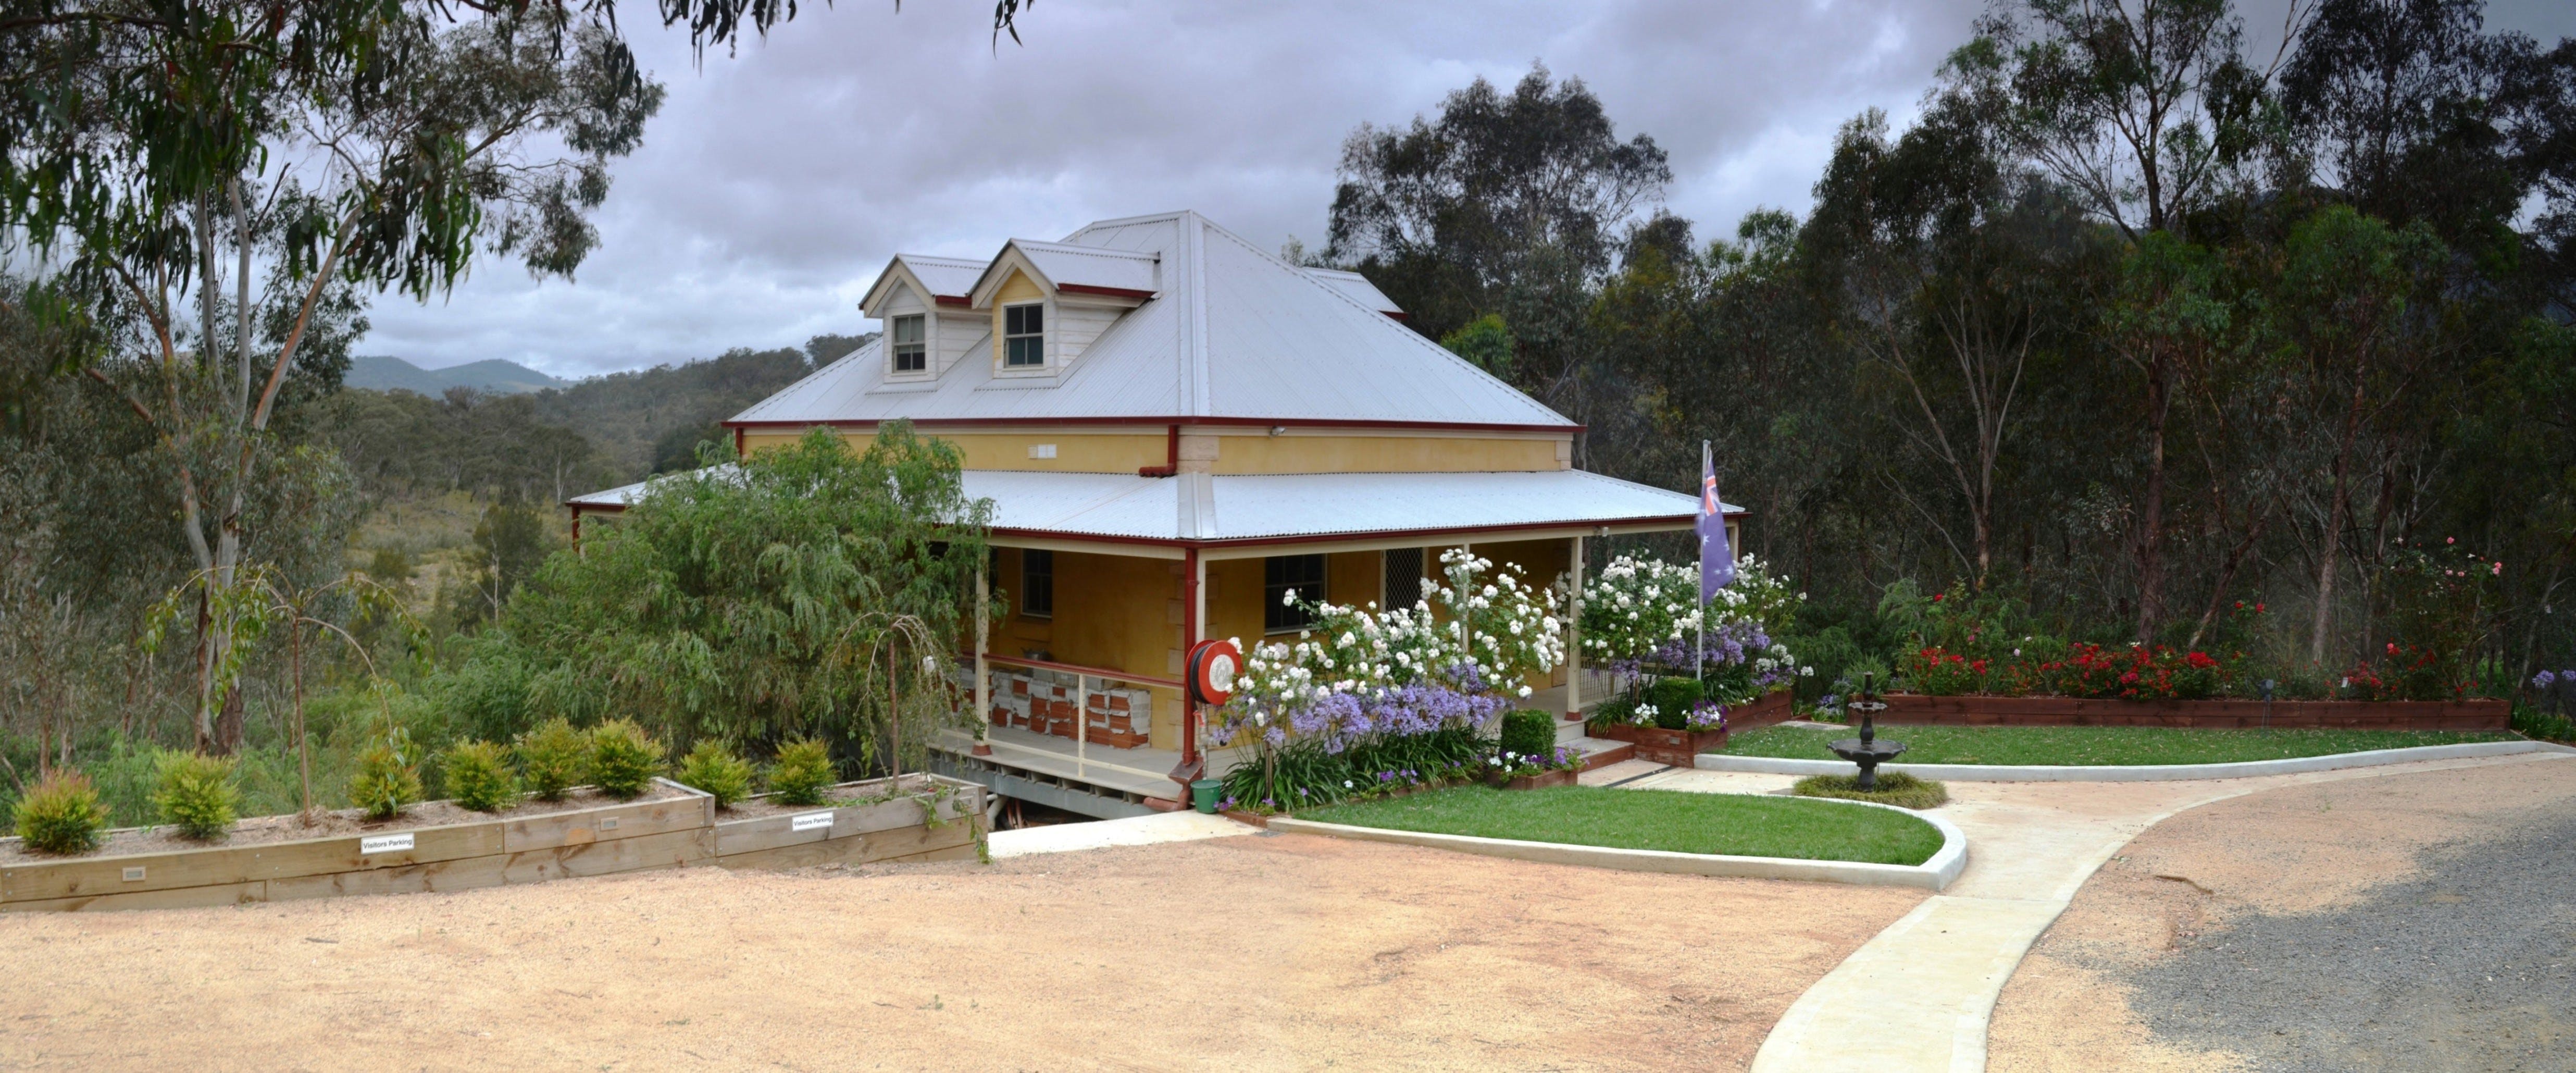 Tanwarra Lodge Bed and Breakfast - Accommodation Gladstone